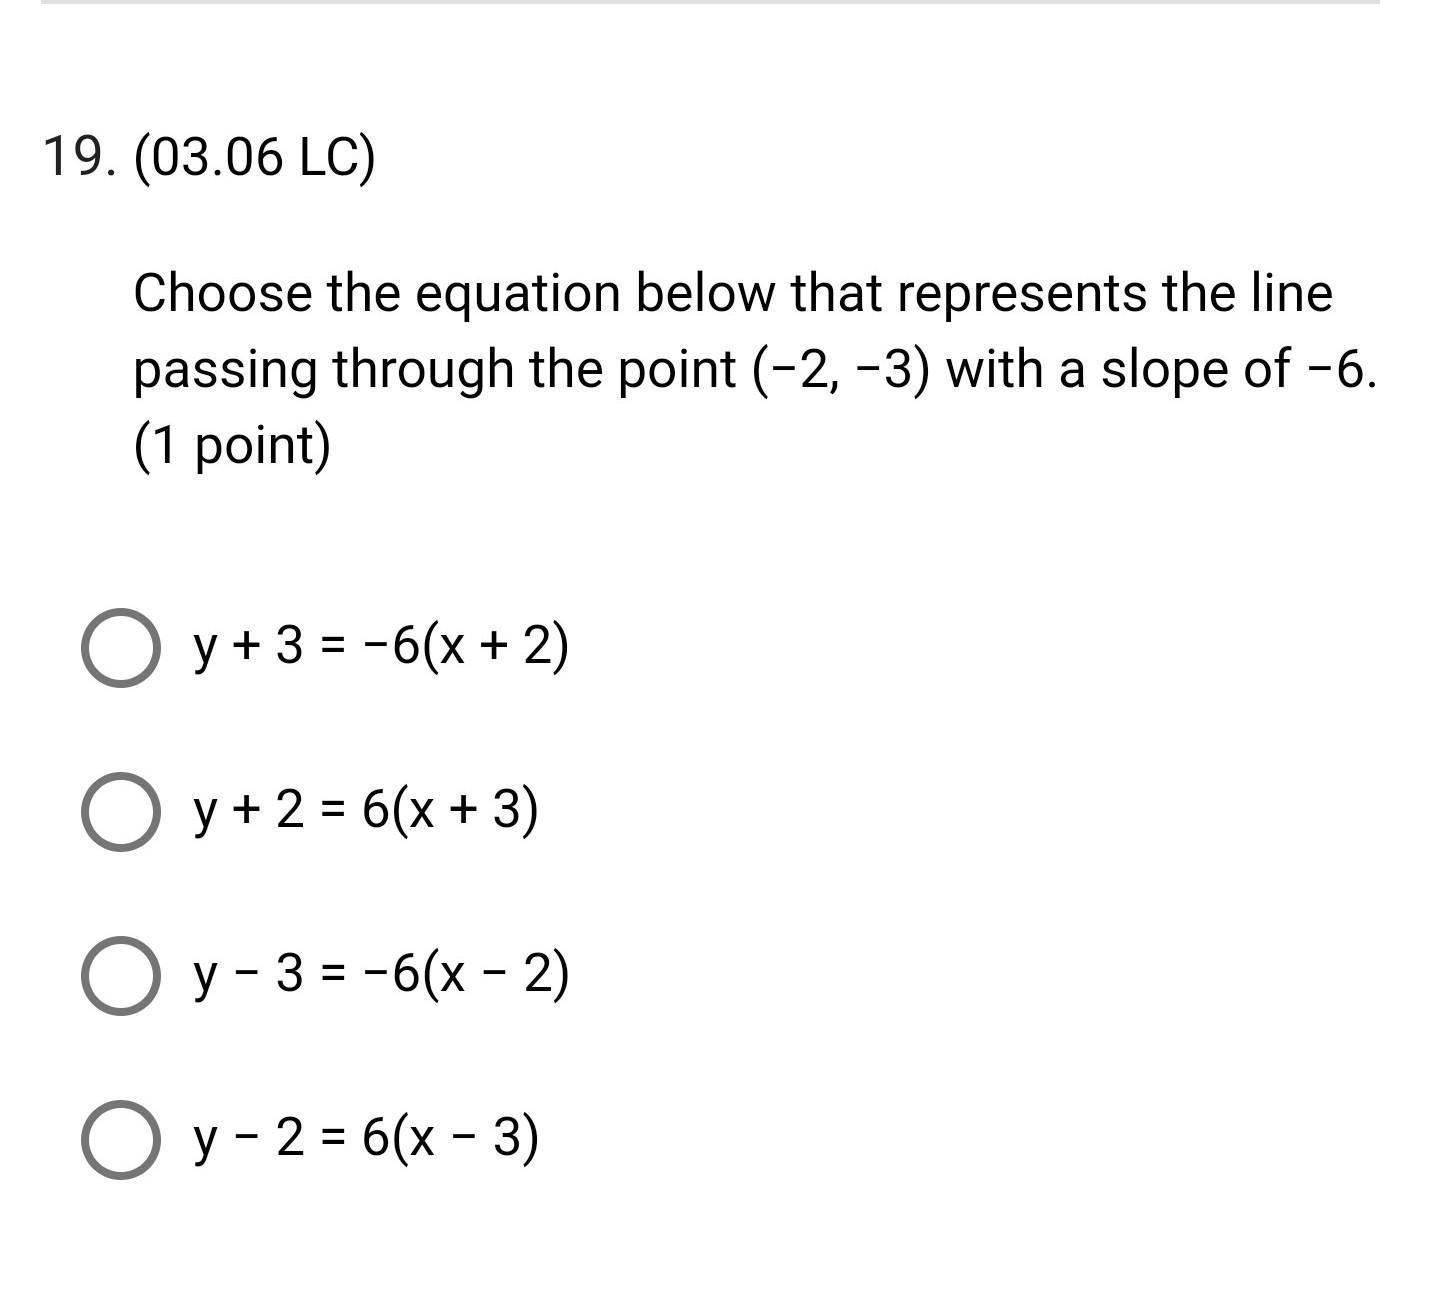 Choose The Equation Below That Represents The Line Passing Through The Point (2, 3) With A Slope Of 6